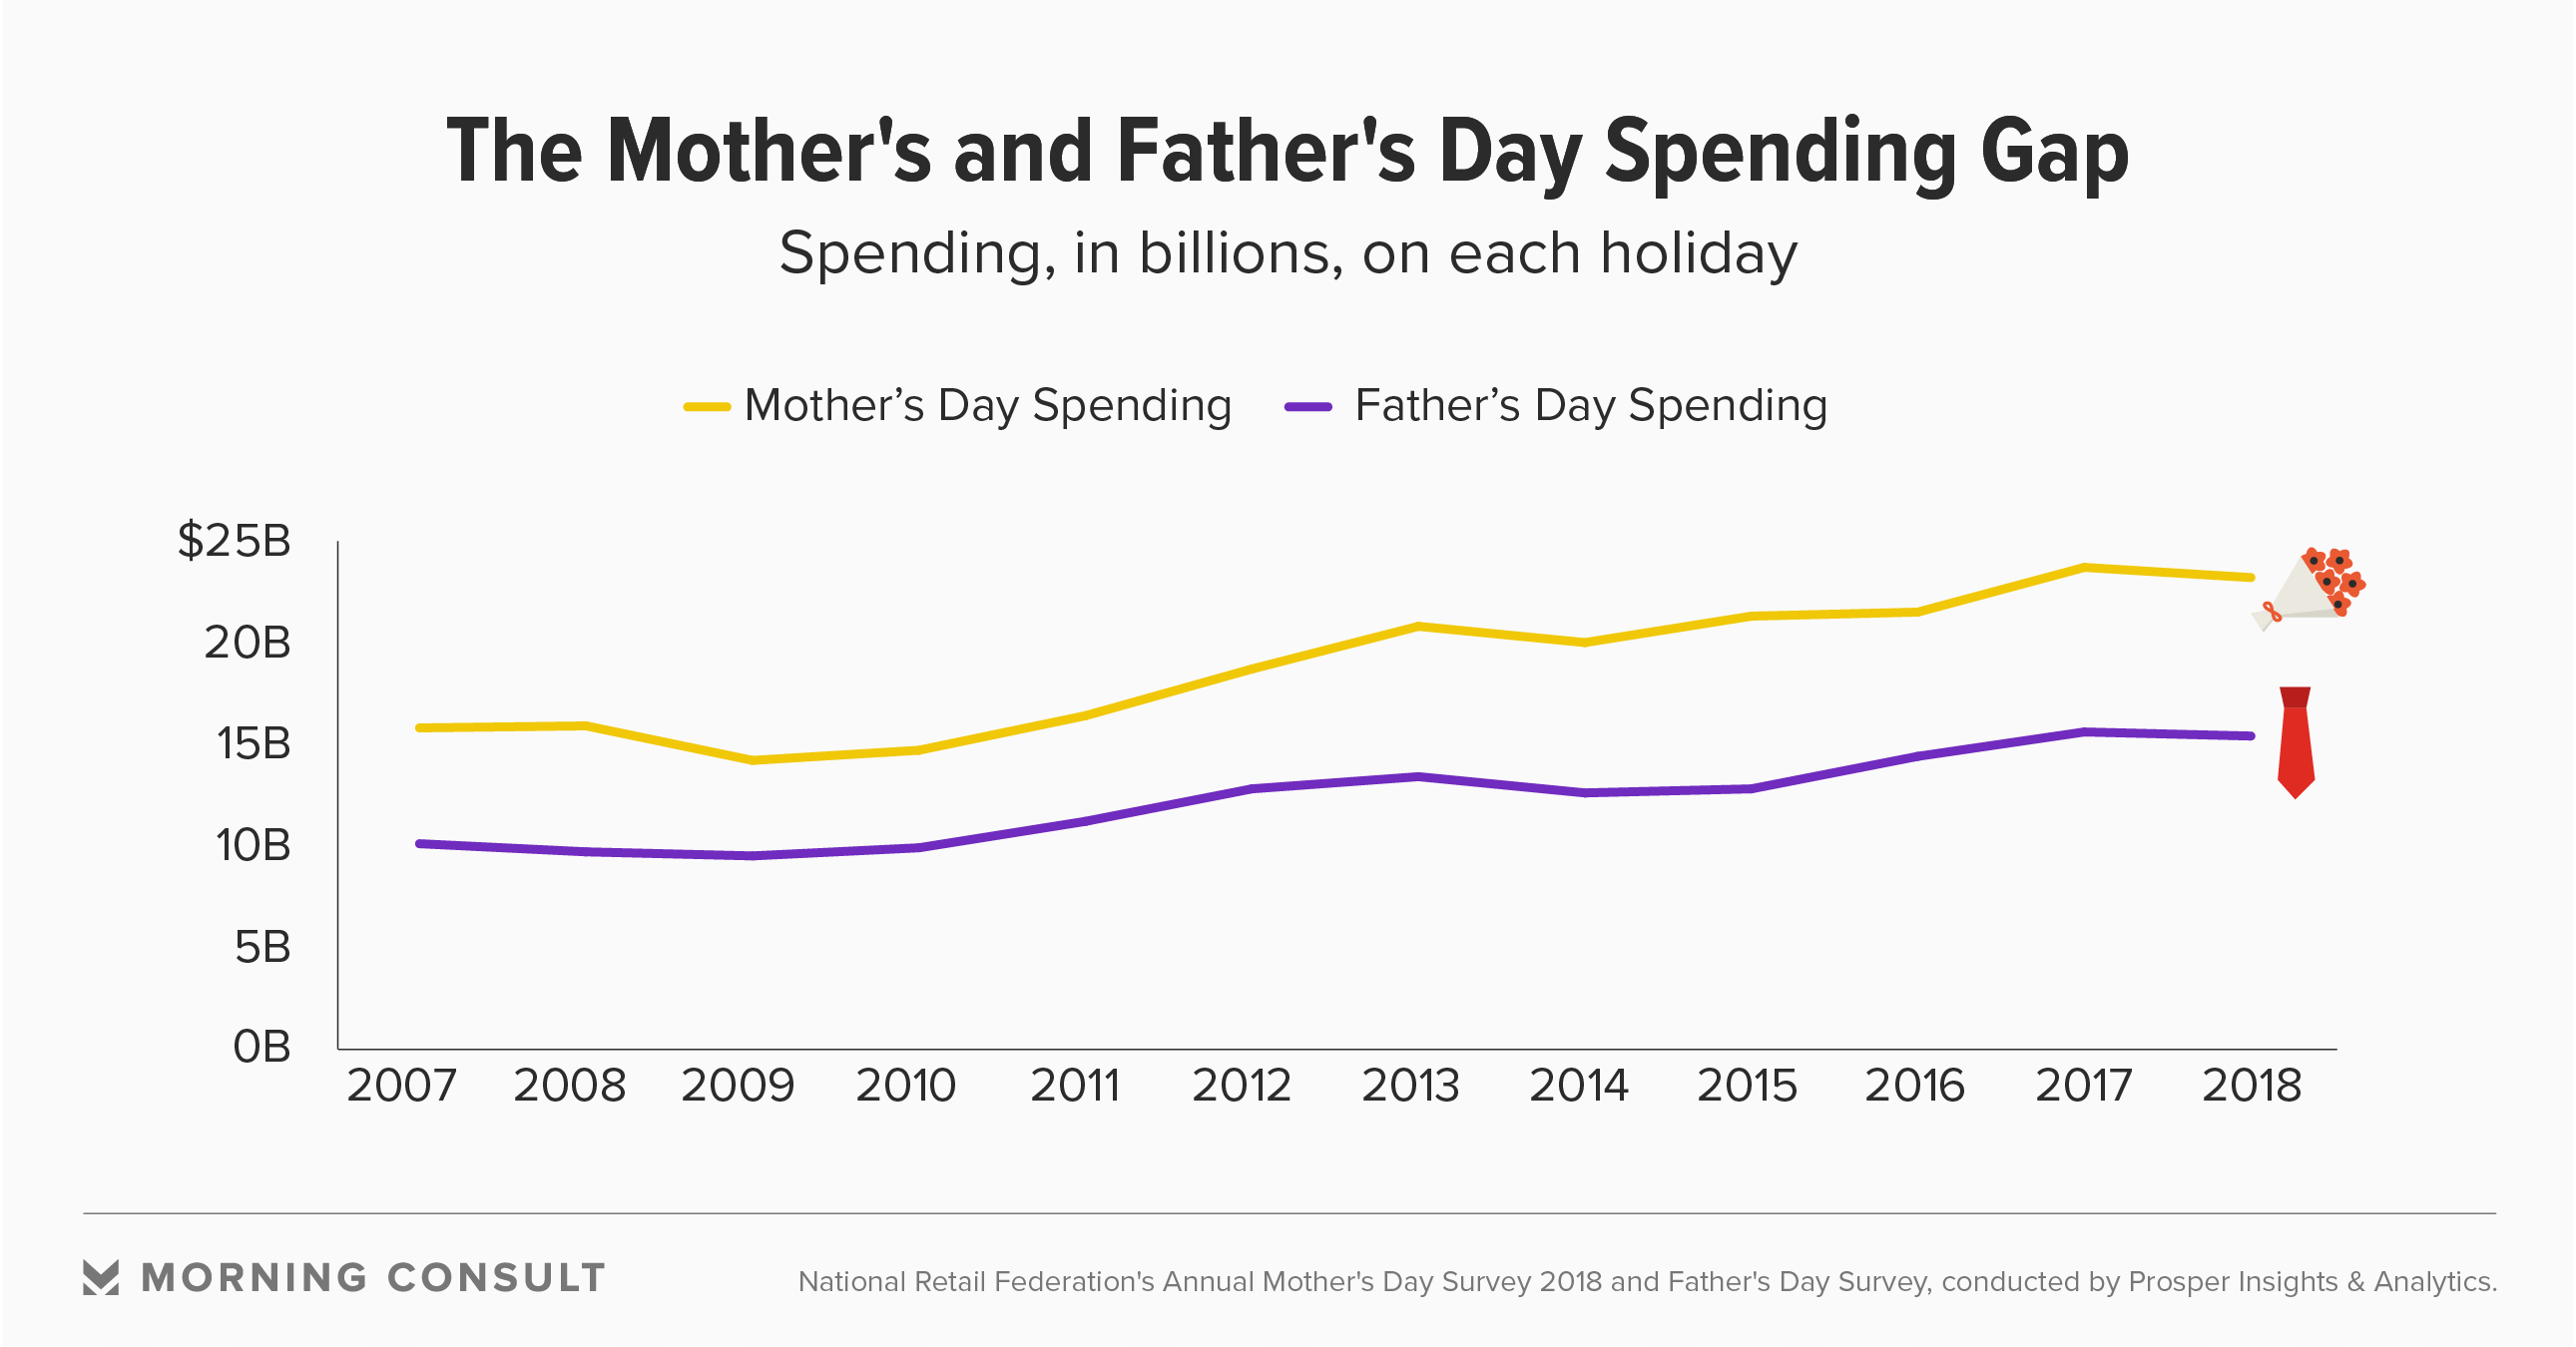 Why We're Still Not Spending Enough on Mother's Day